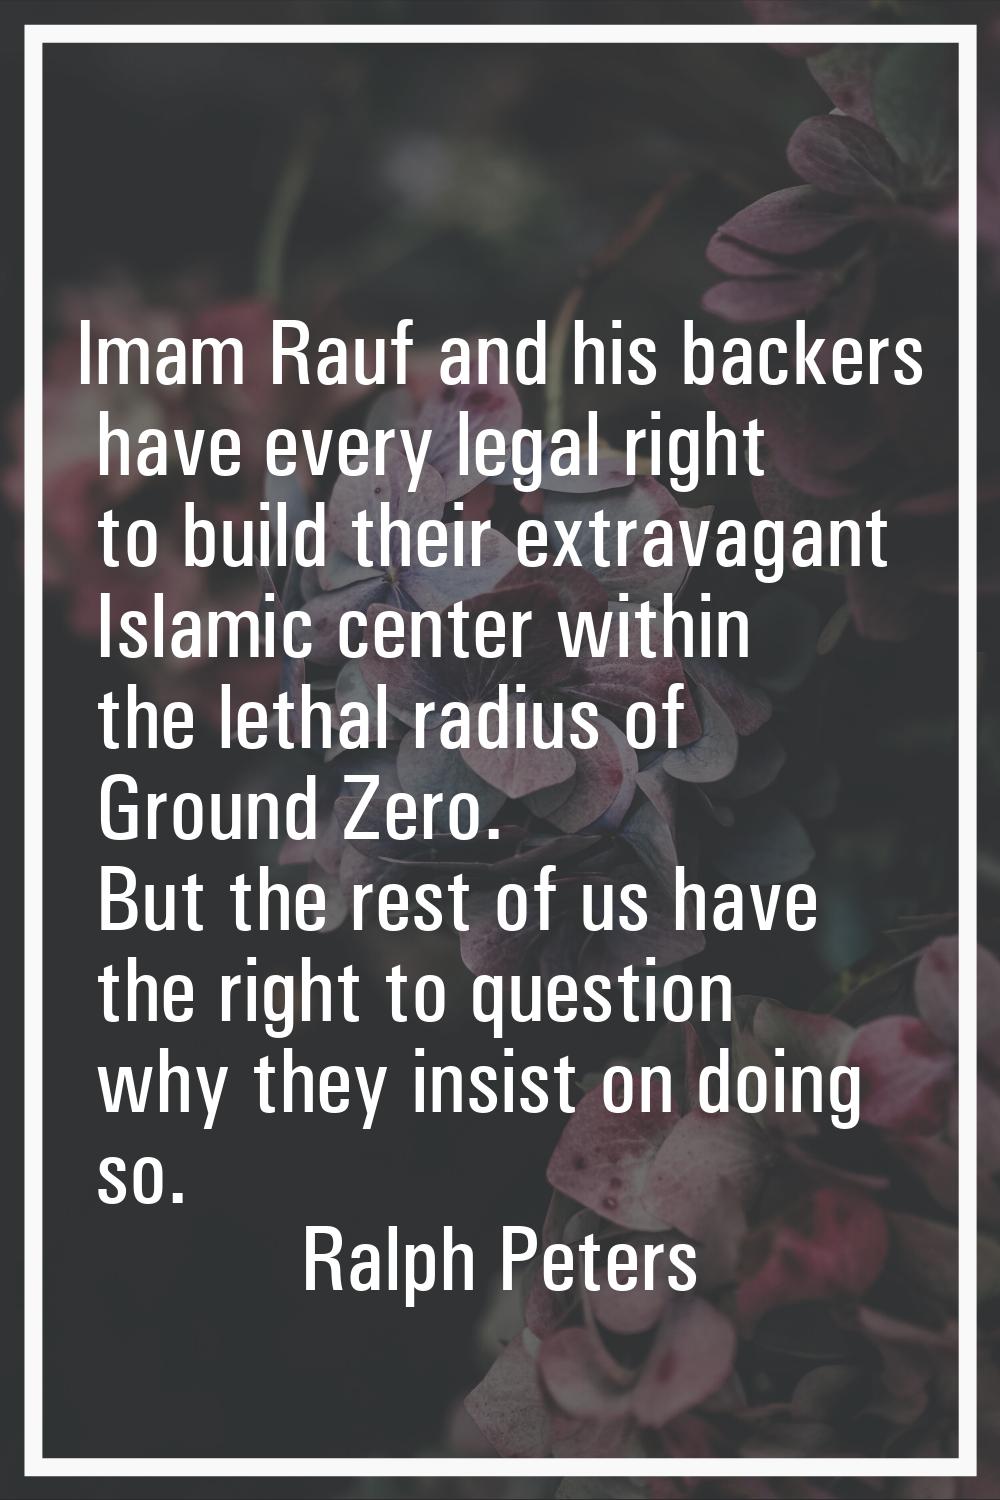 Imam Rauf and his backers have every legal right to build their extravagant Islamic center within t